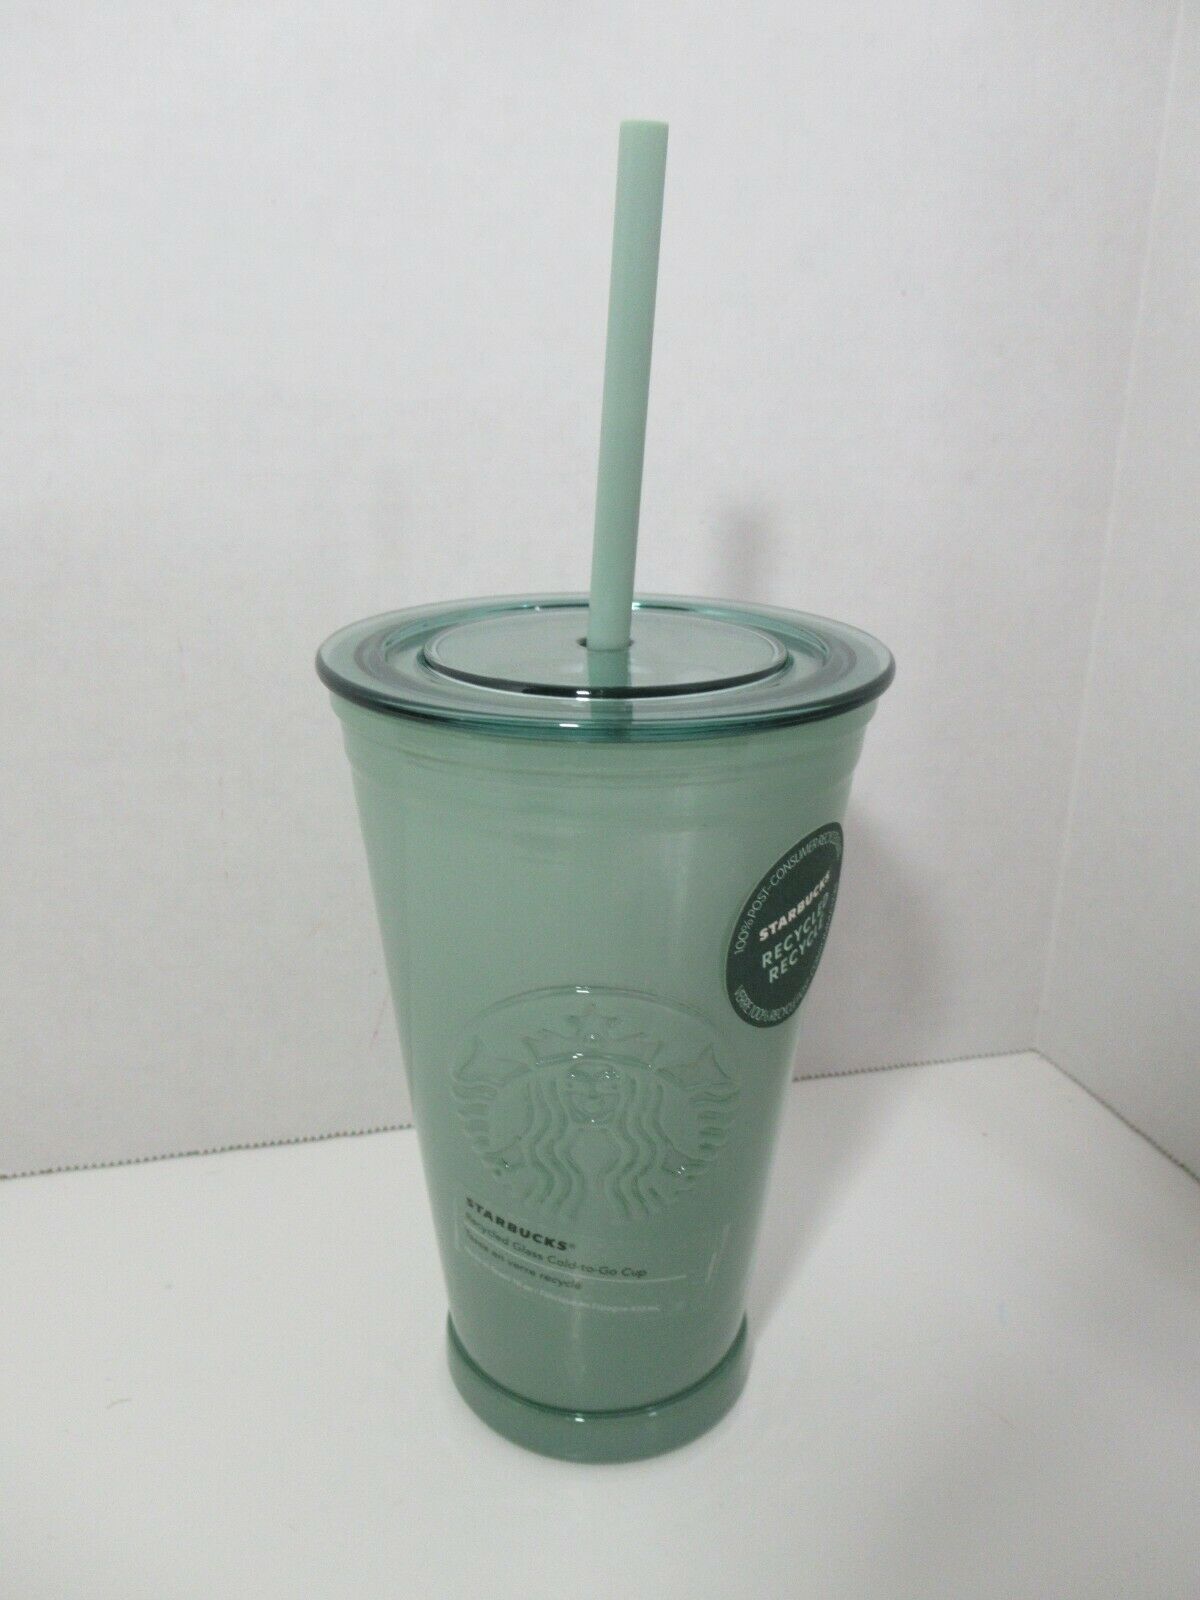 Reusable Cold Cup Tumbler - Frosted w/ Lid & Straw 24oz- Starbucks Large  Size